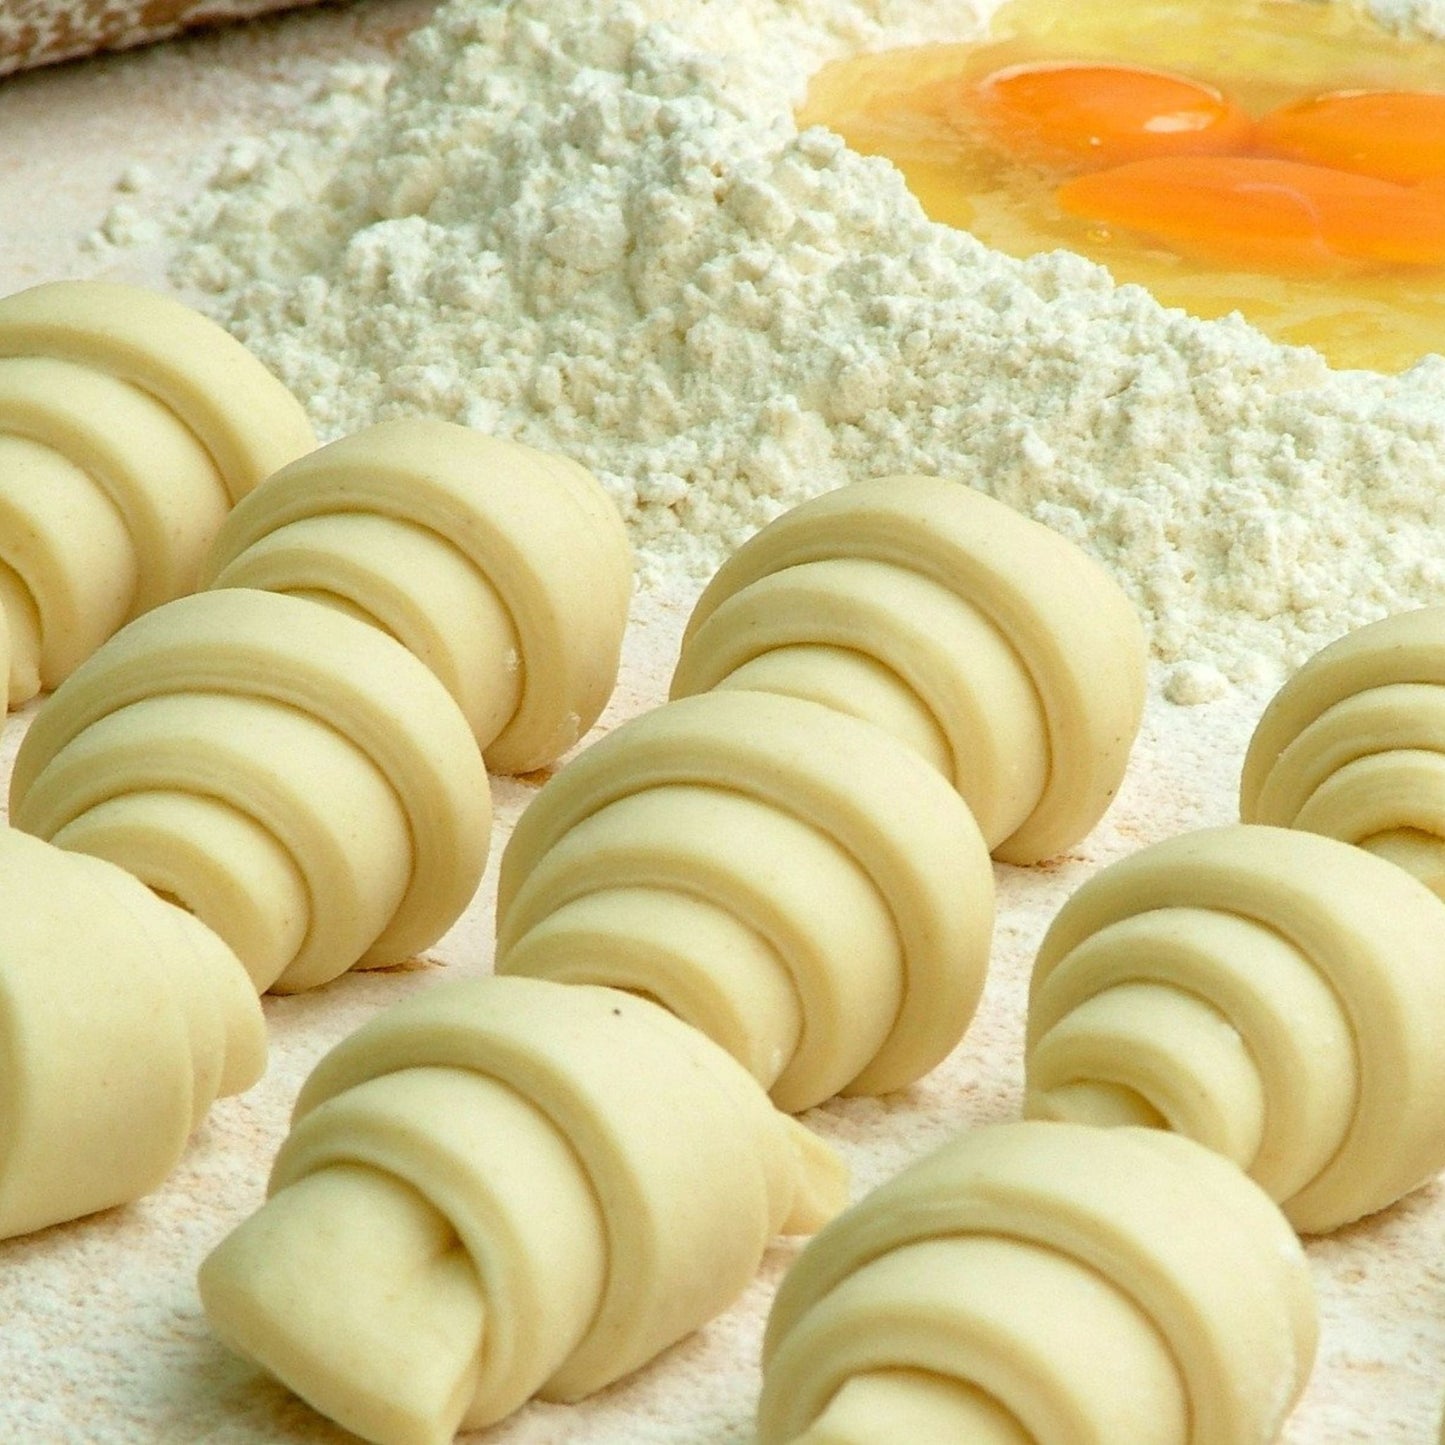 Croisants ready to bake, flour with eggs in a well